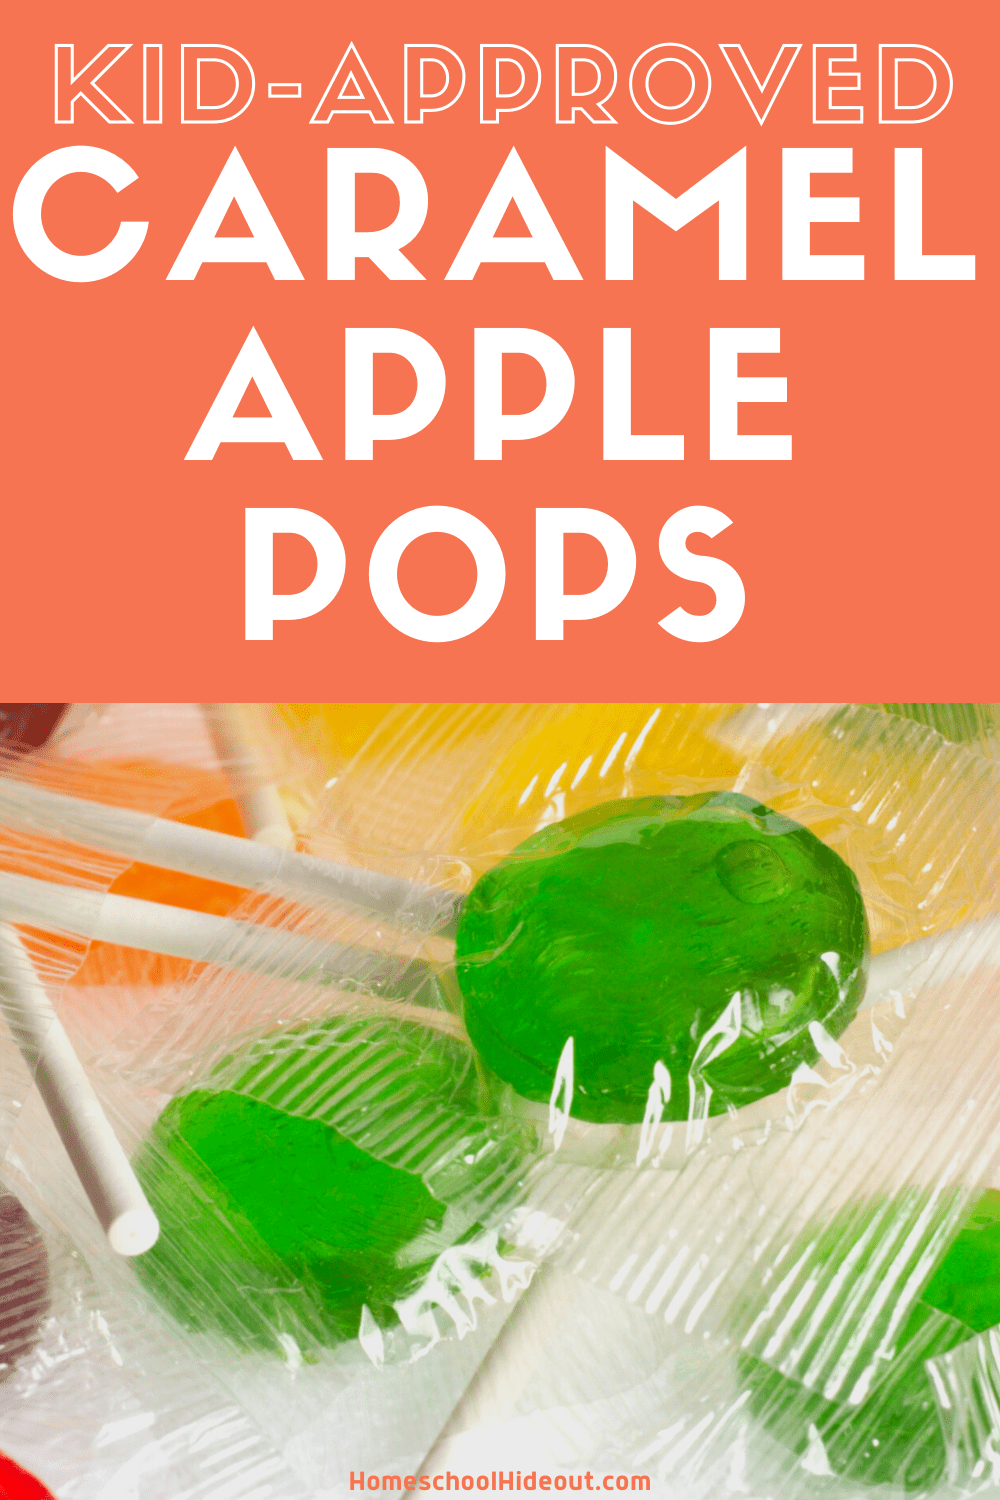 Caramel apple pops are so flippin' good and SO easy to make! We are obsessed!